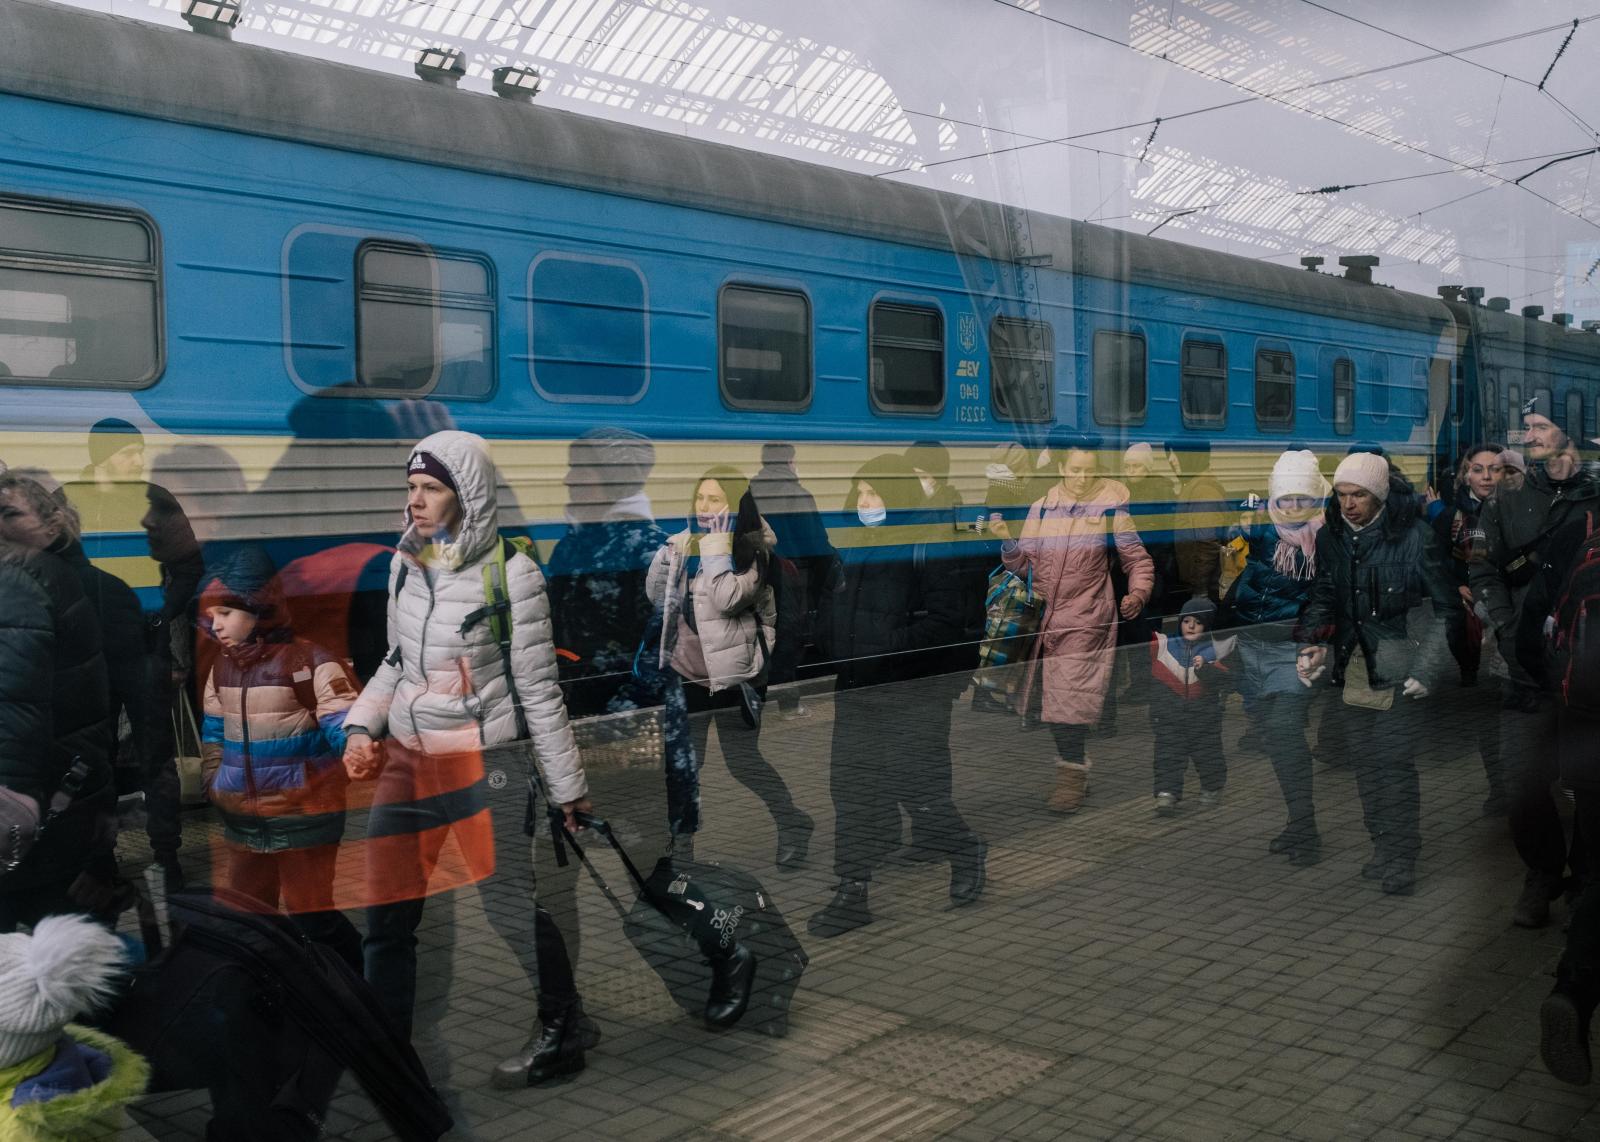 March 4th, 2022 - Lviv Central Station